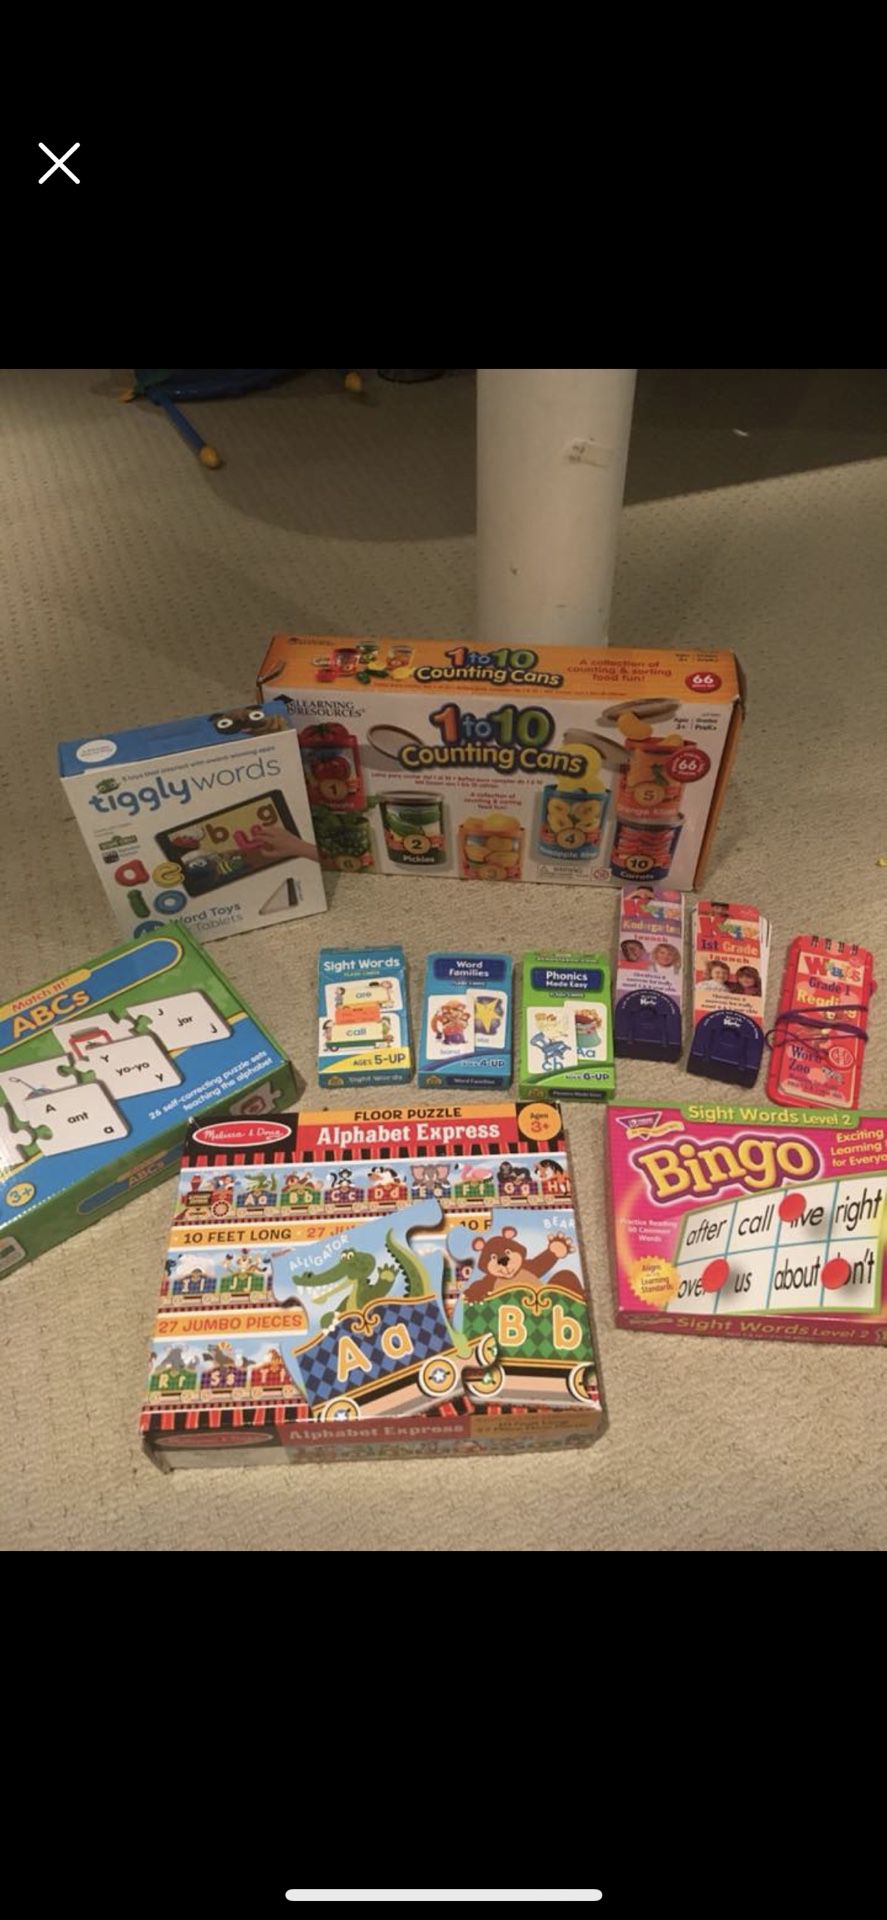 Learning Games K- First Grade - Melissa & Doug, Counting Cans, Tiggly Words, Puzzles, Bingo